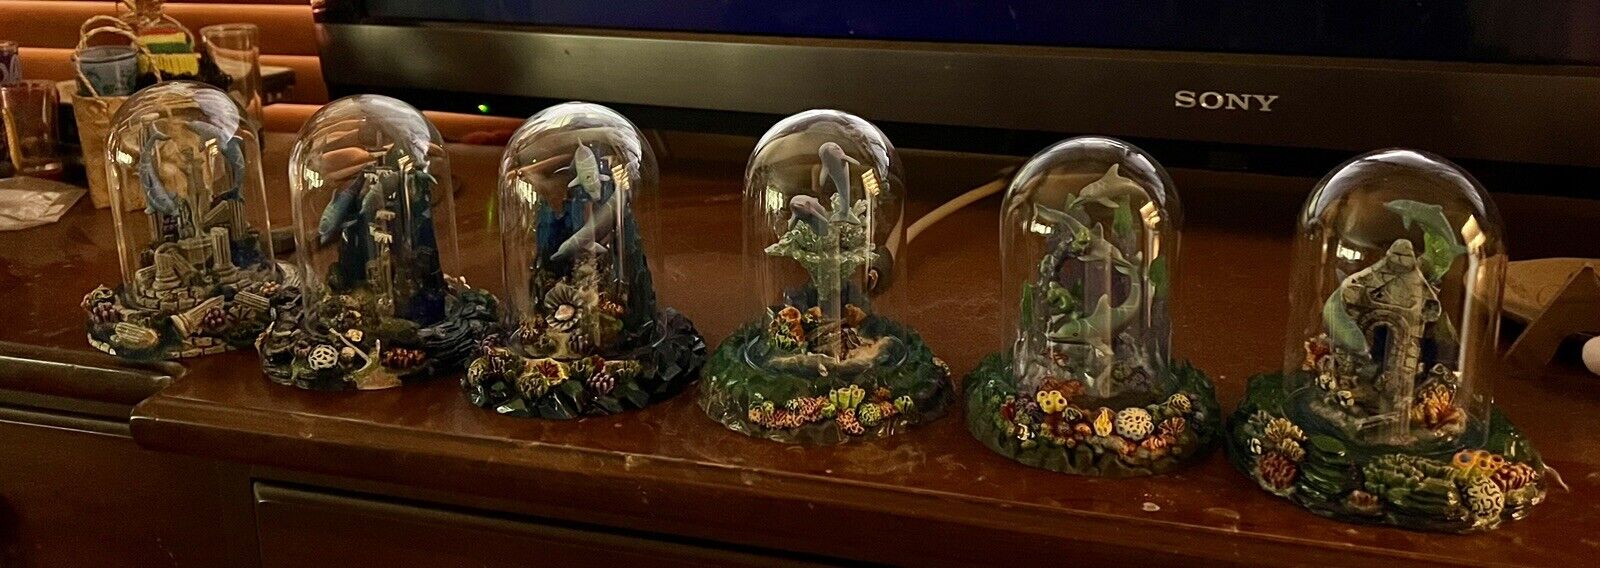 Franklin Mint Hand-Painted Limited Edition Dolphin Figurine Collection (6)